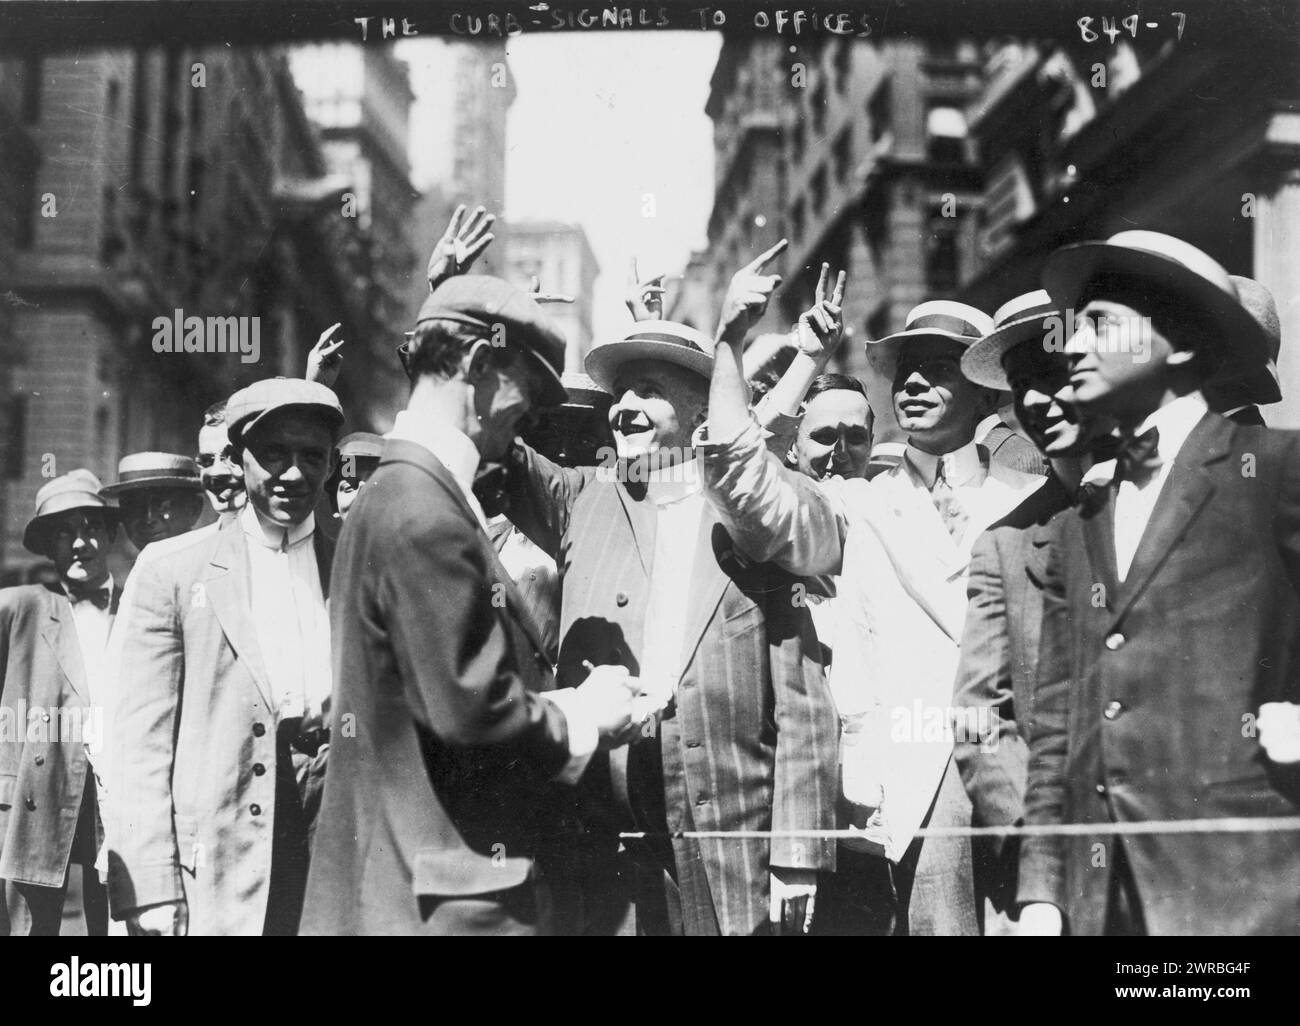 Signalling to offices, curb market, New York City, Stock trading on the New York Curb Association market, with brokers and clients signalling from street to offices., c1916., Stock exchanges, New York (State), New York, 1910-1920, Photographic prints, 1910-1920., Photographic prints, 1910-1920, 1 photographic print Stock Photo